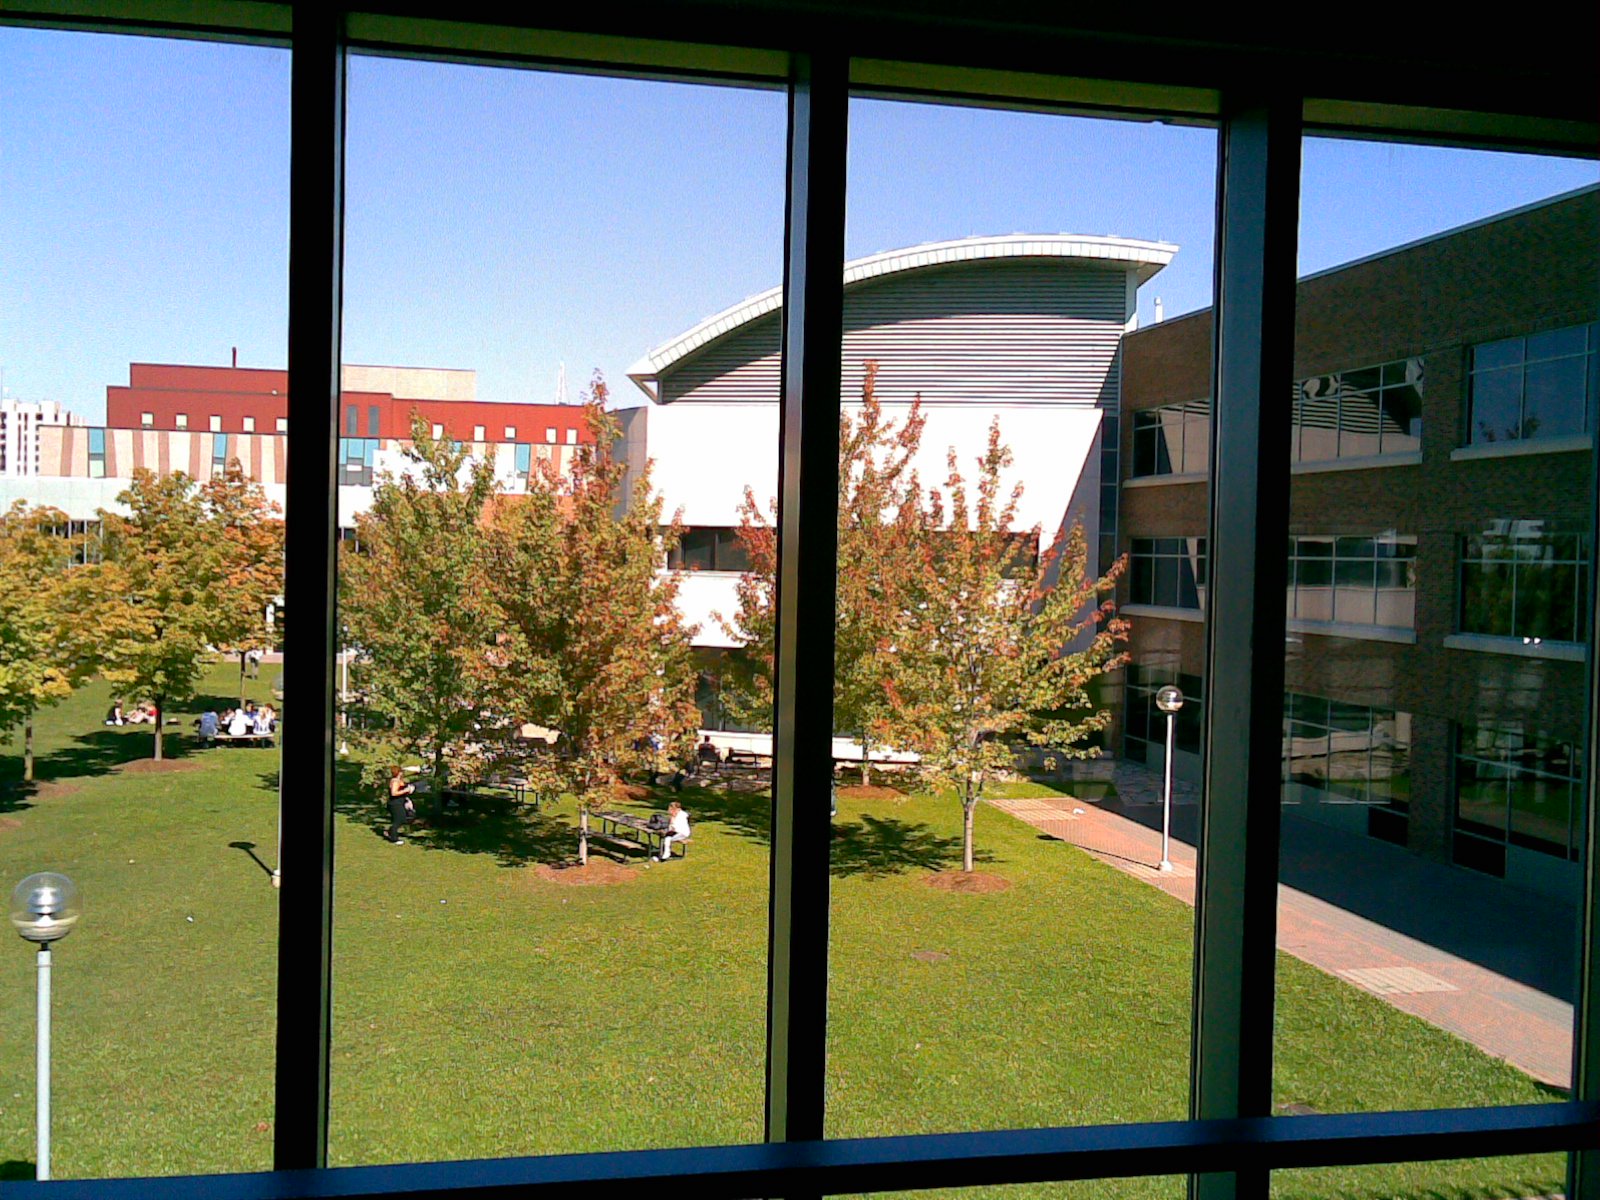 a view from a window looking down at a grassy area